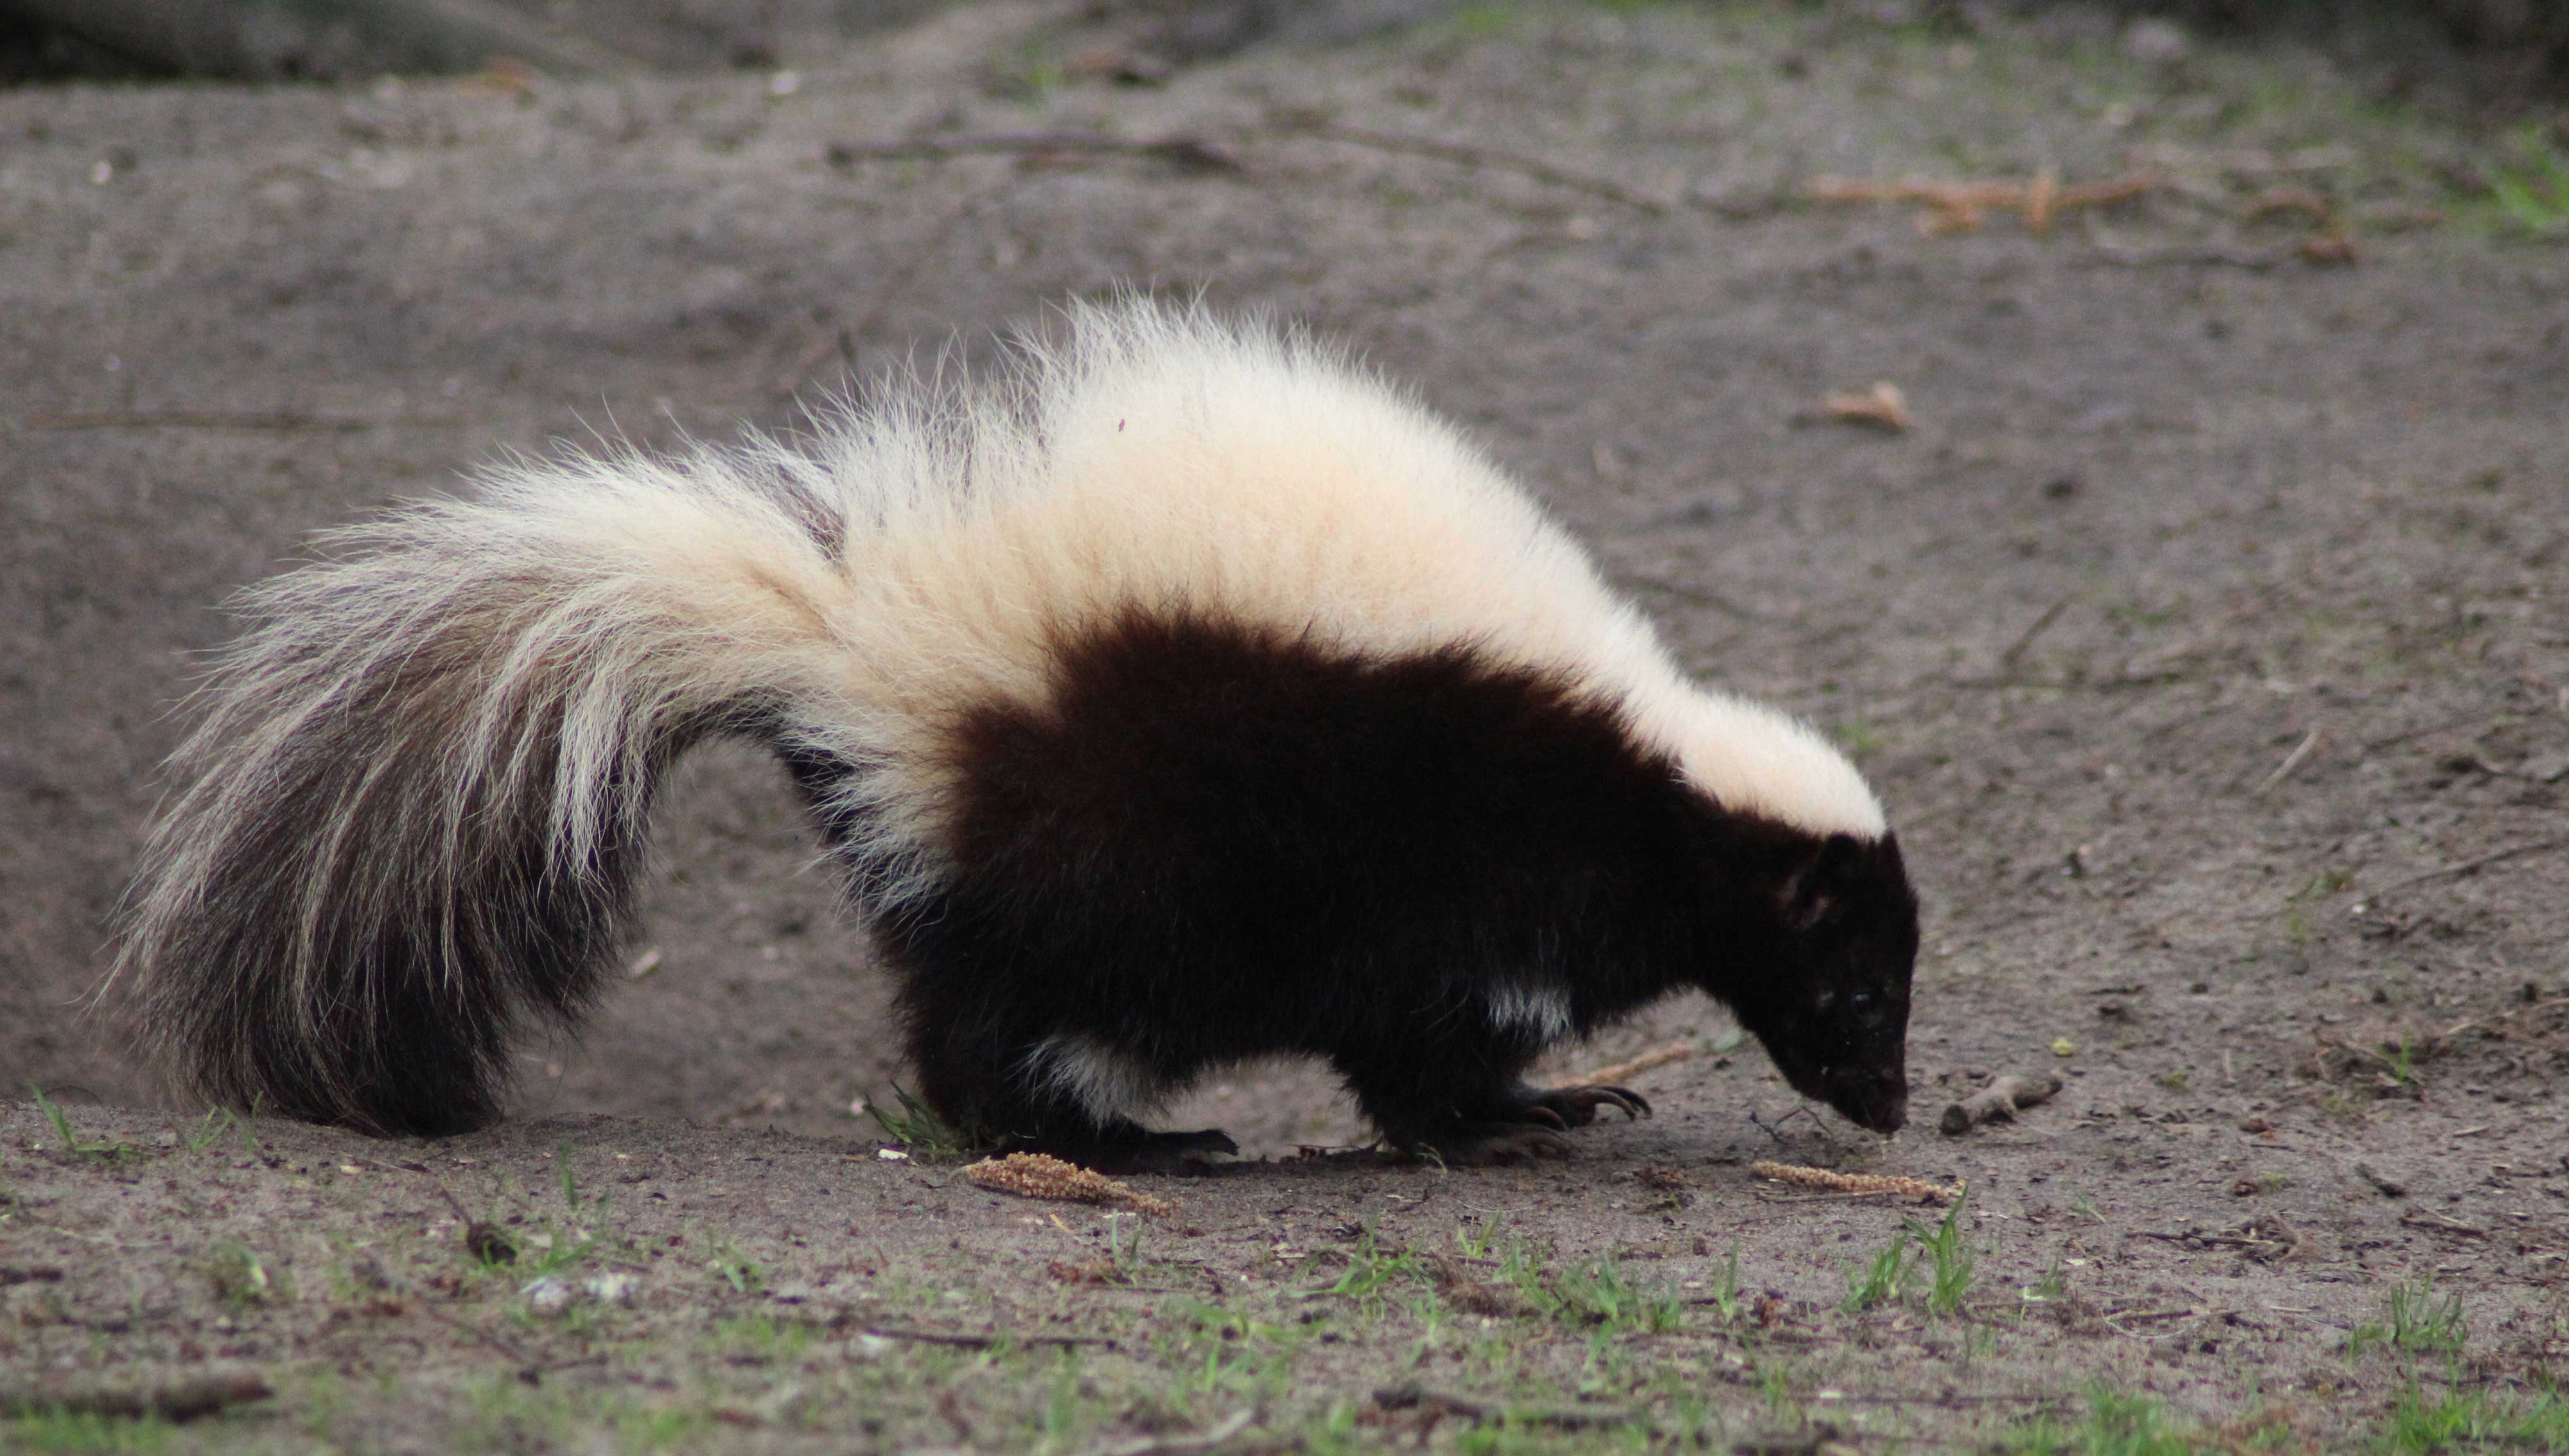 A skunk on a trail.